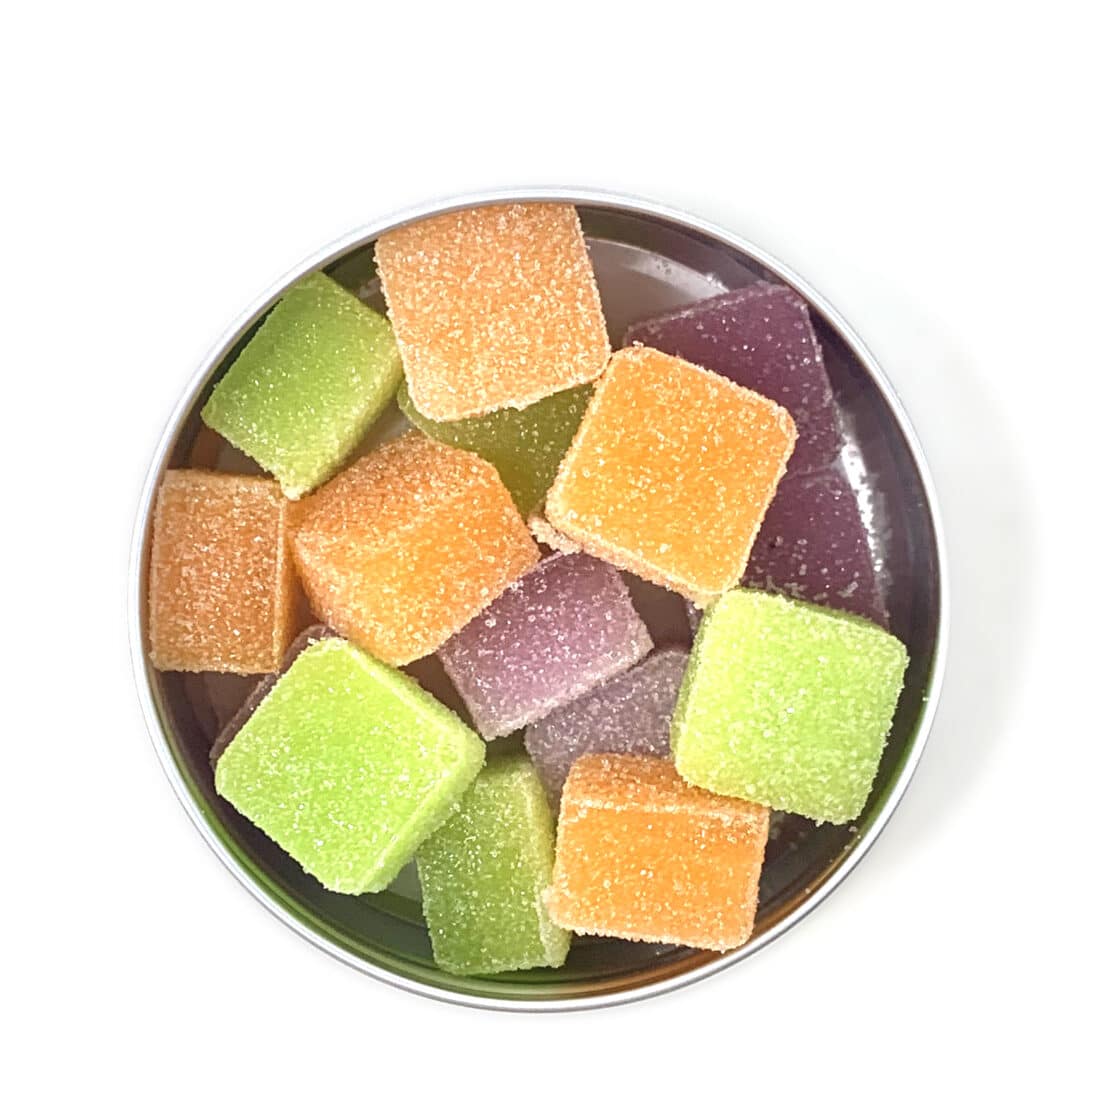 Bliss Party Mix Gummies (300 Mg)